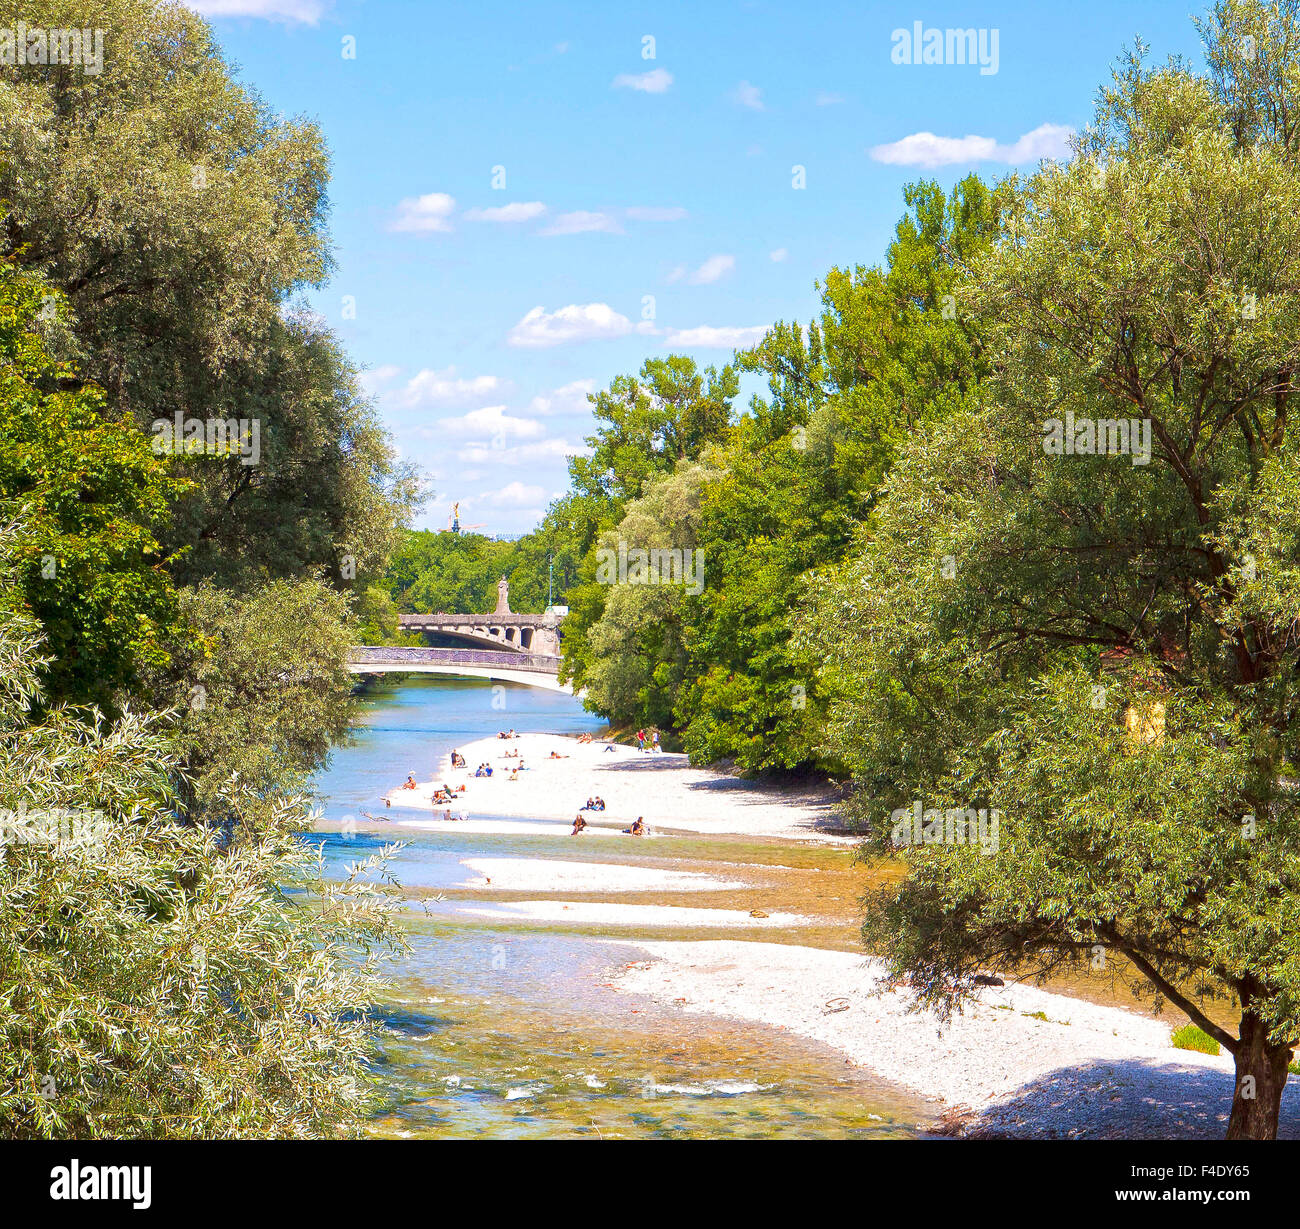 MUNICH, GERMANY Panoramic view of Isar river in Munich. People enjoy the sun and weather on the  river banks Stock Photo